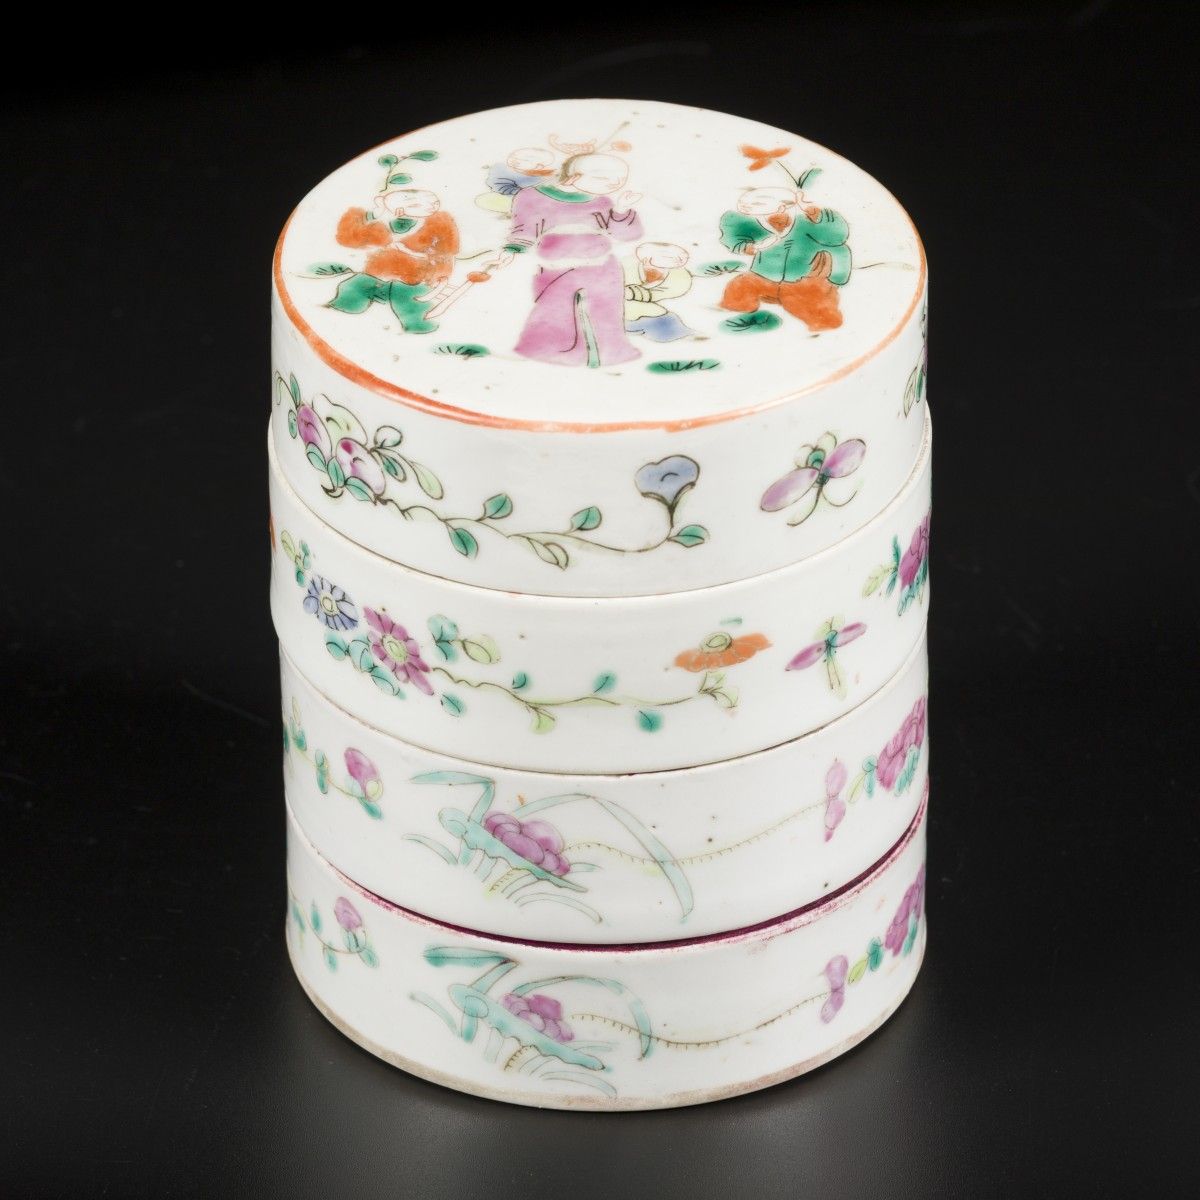 A porcelain famille rose food container. China, late 19th century. 直径8.5厘米。芯片。